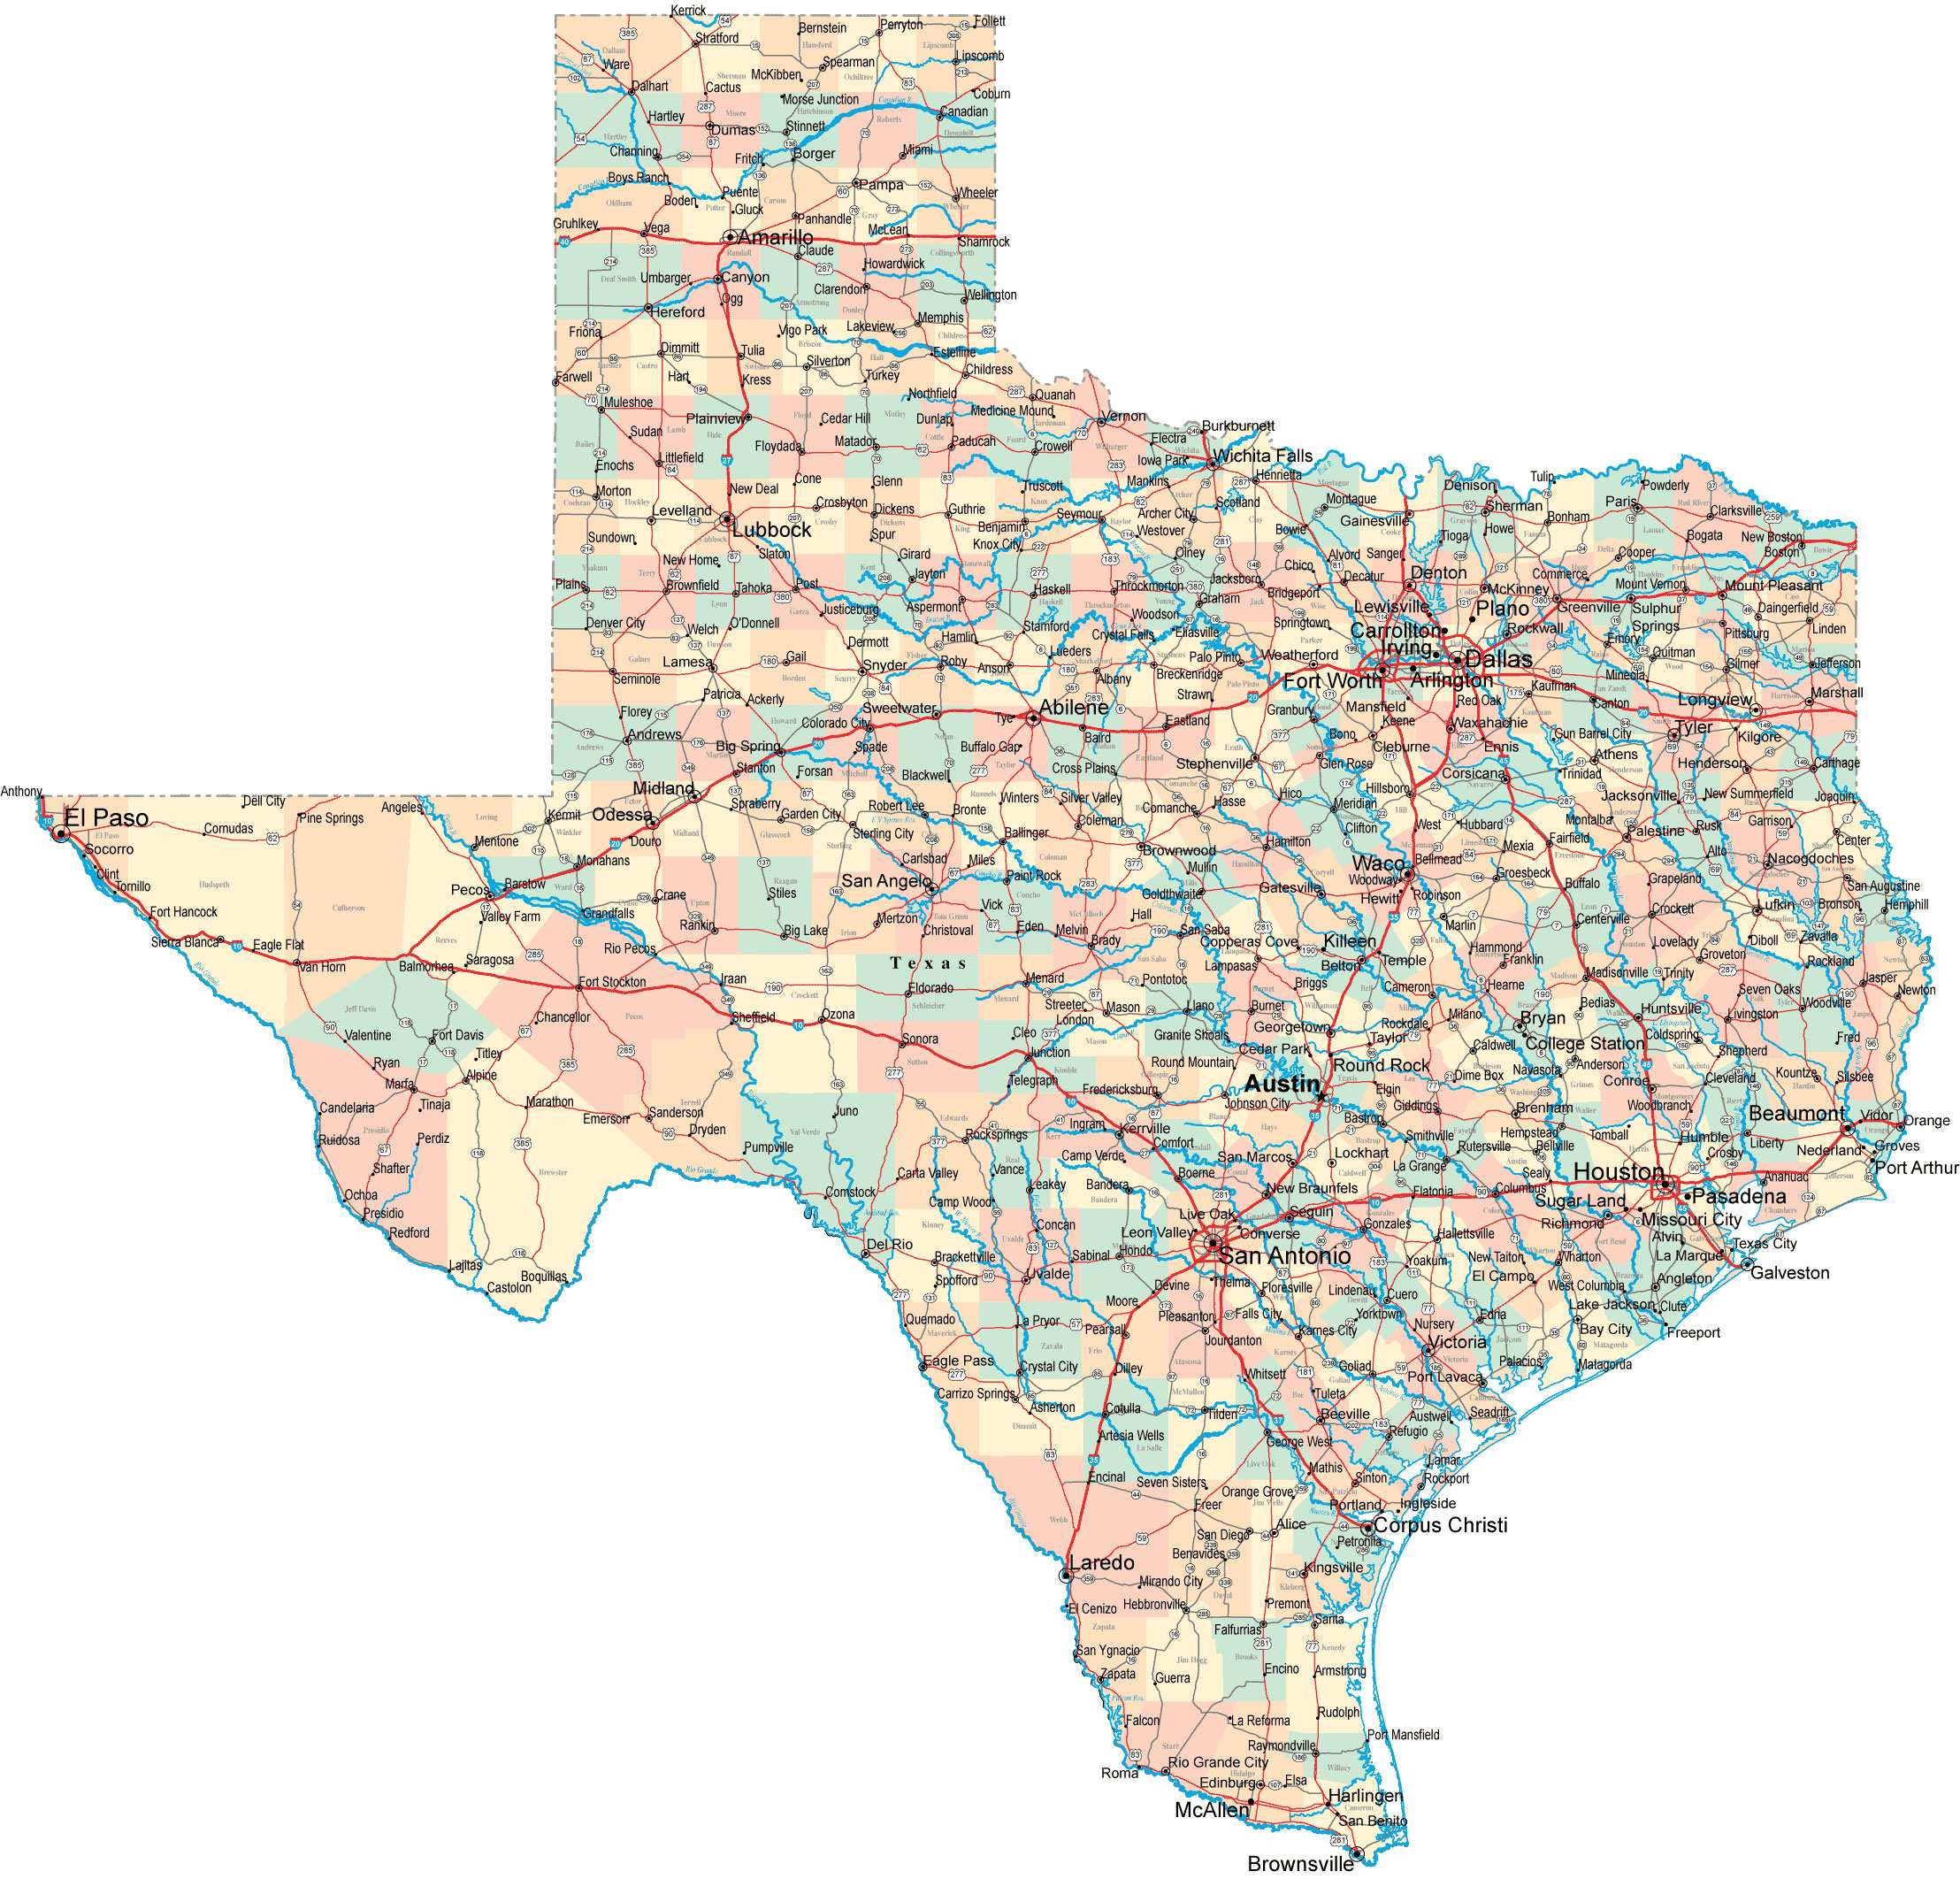 Large Texas Maps For Free Download And Print | High-Resolution And - Printable Texas Road Map